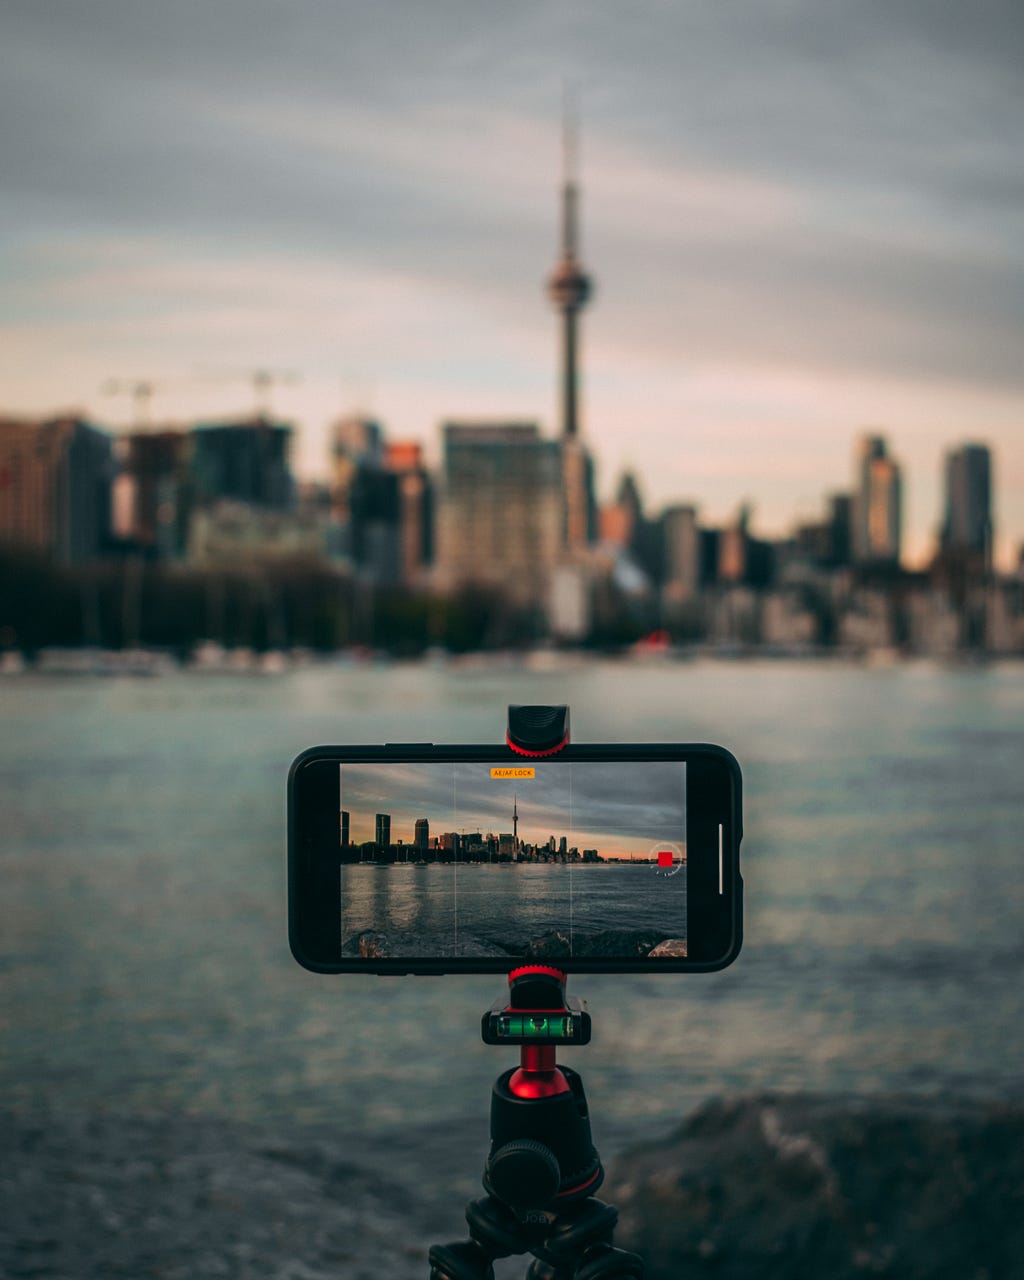 iphone taking video of large city across a body of water